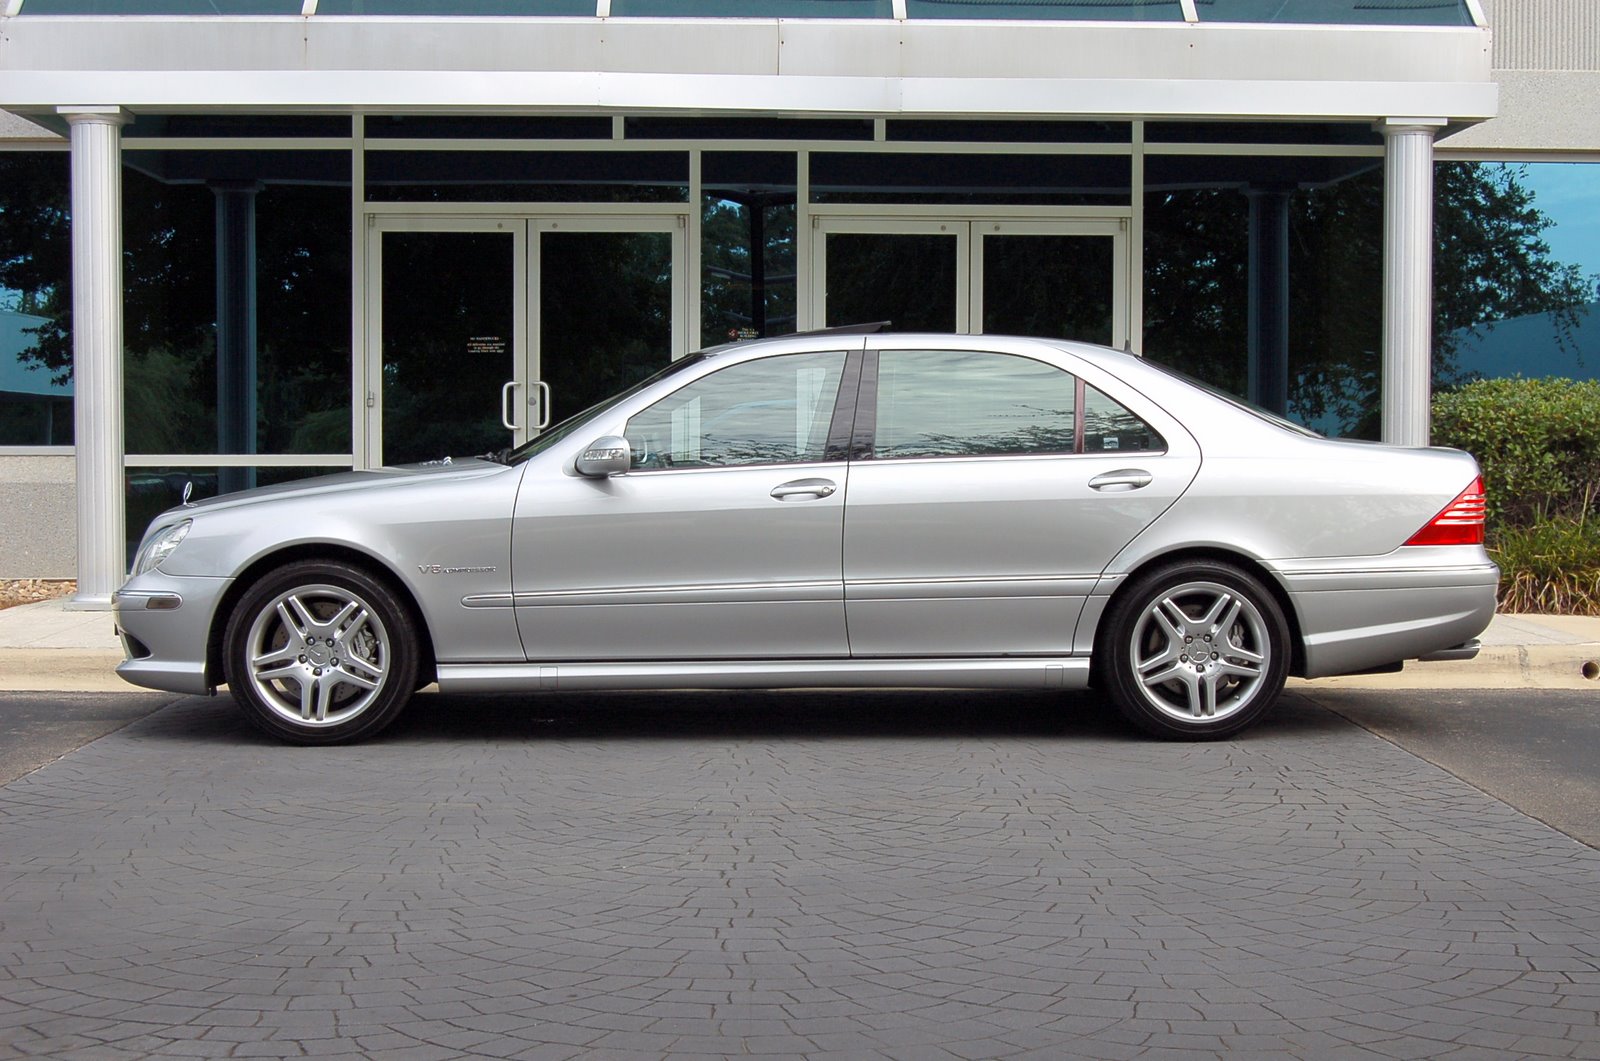 mercedes-benz s 55 amg-pic. 2